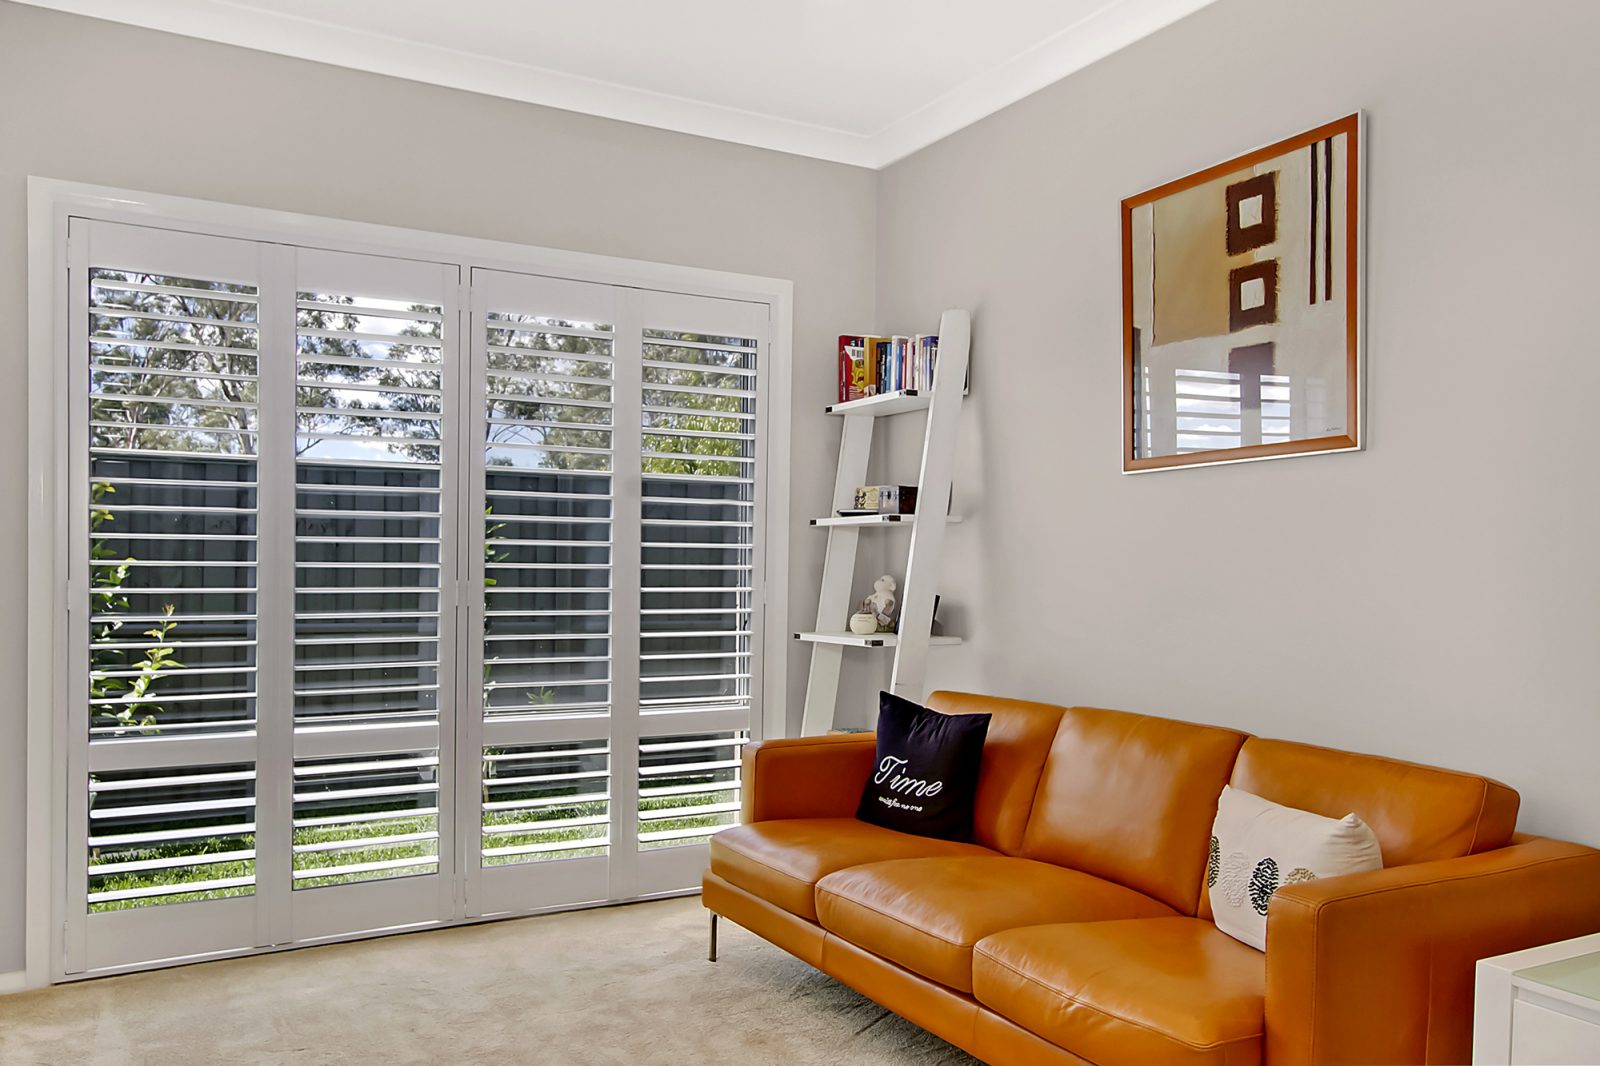 Plantation shutters check all the boxes - Style, function and value